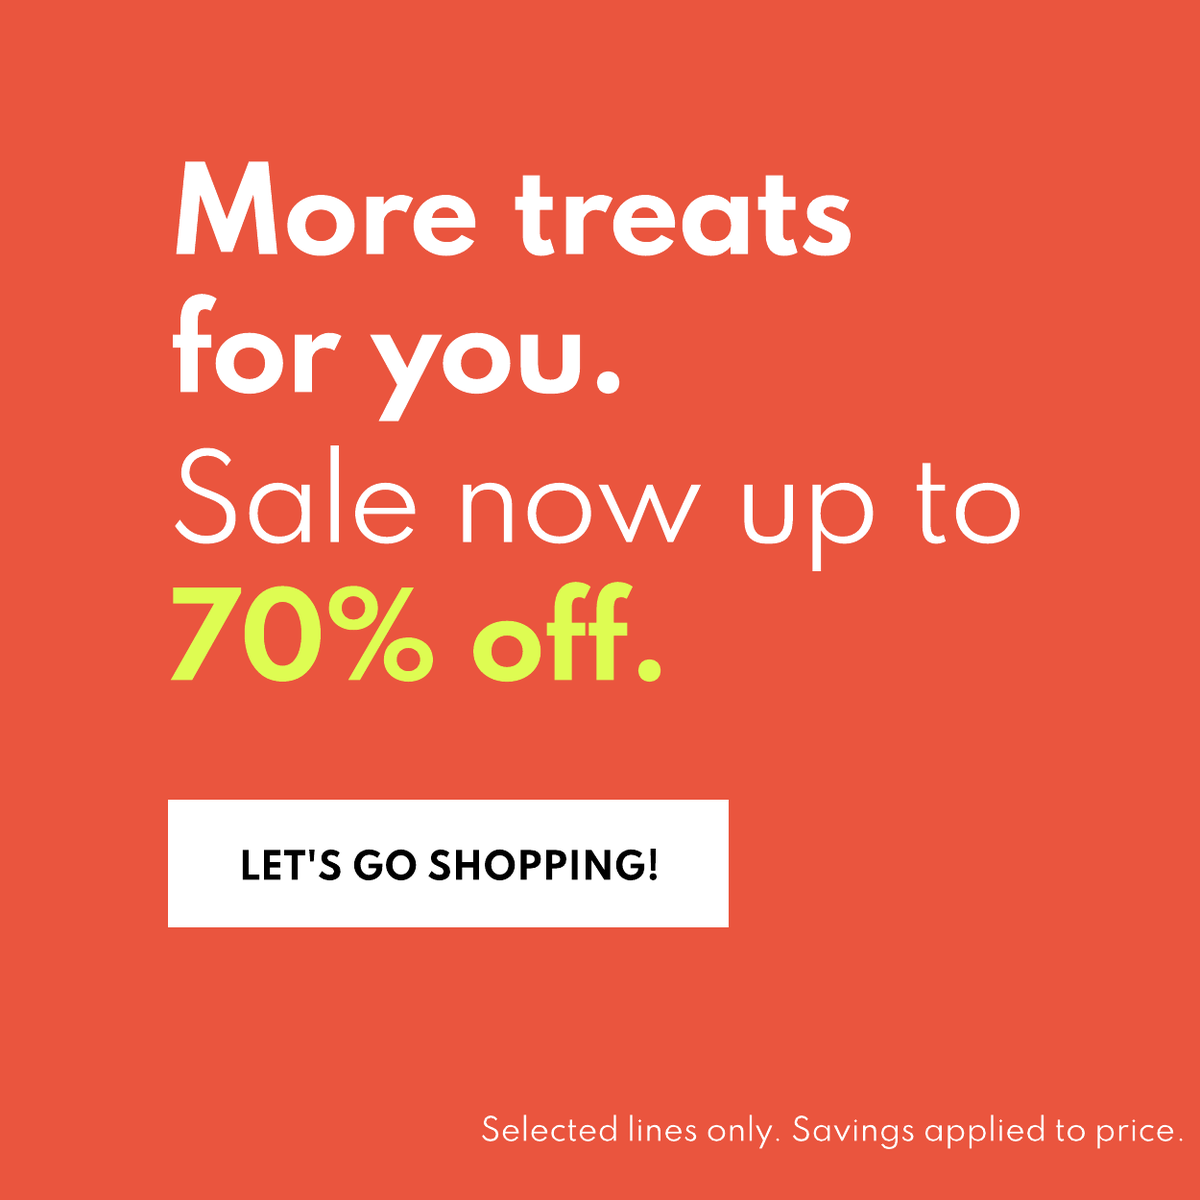 More treats for you. Sale now up to 70% off. Let's go shopping! Selected lines only. Savings applied to price.